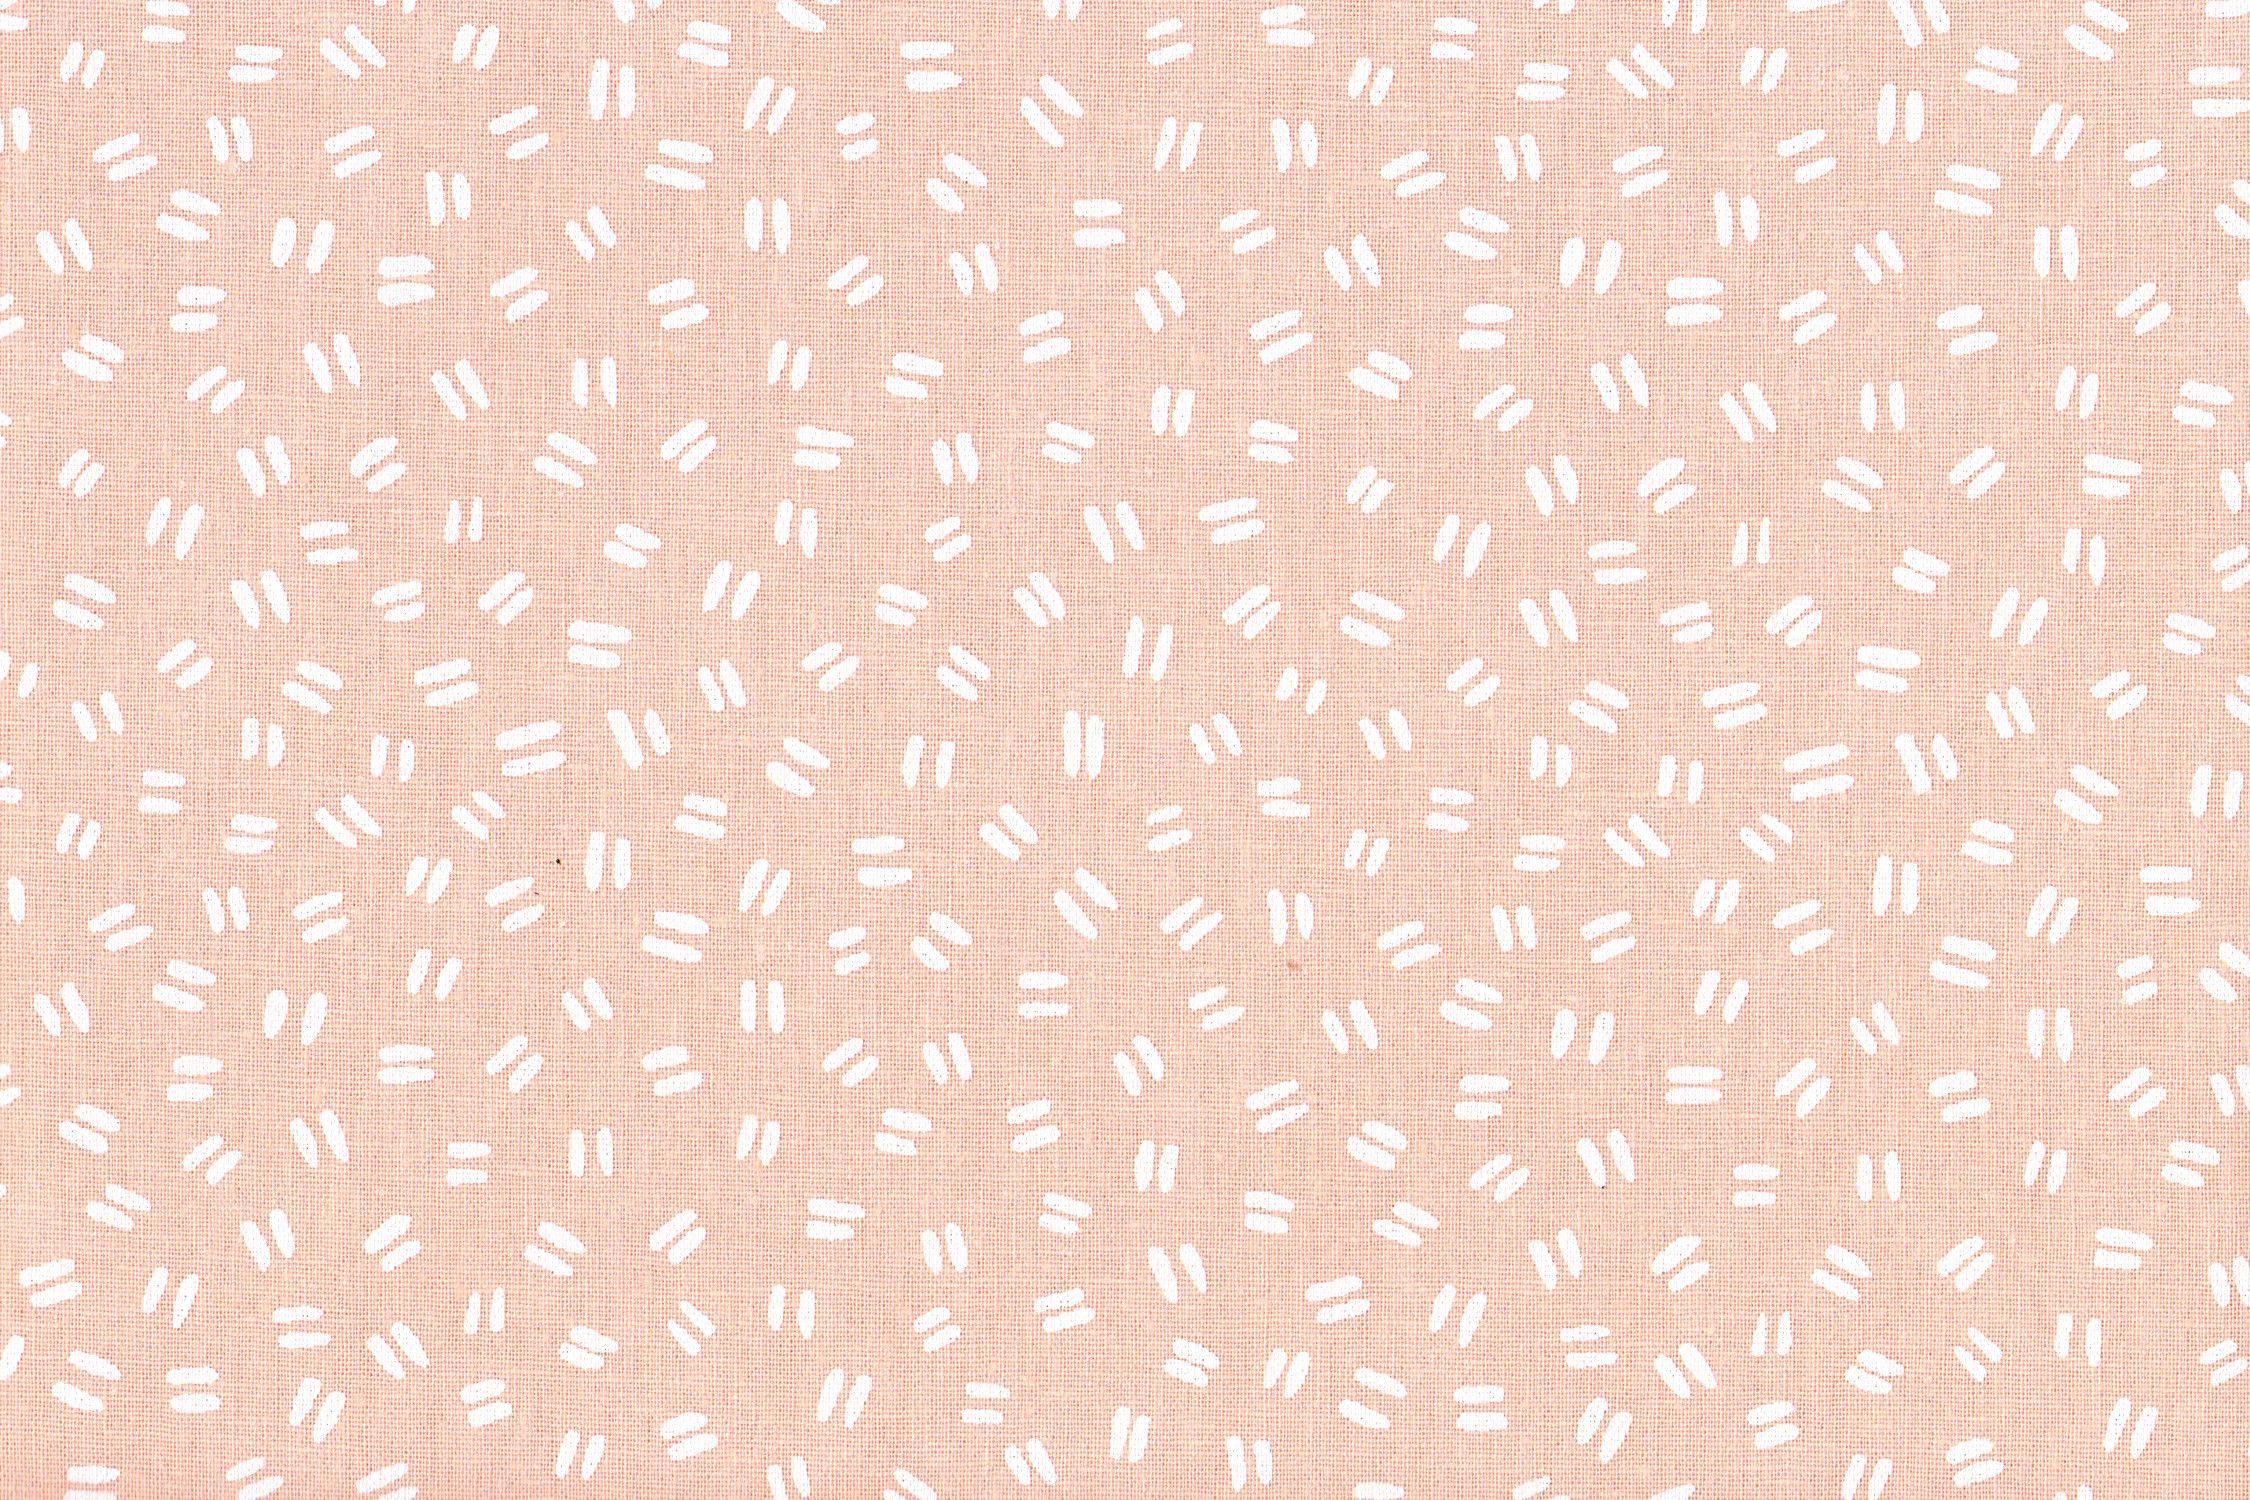 20 Greatest blush pink desktop wallpaper You Can Save It Without A ...